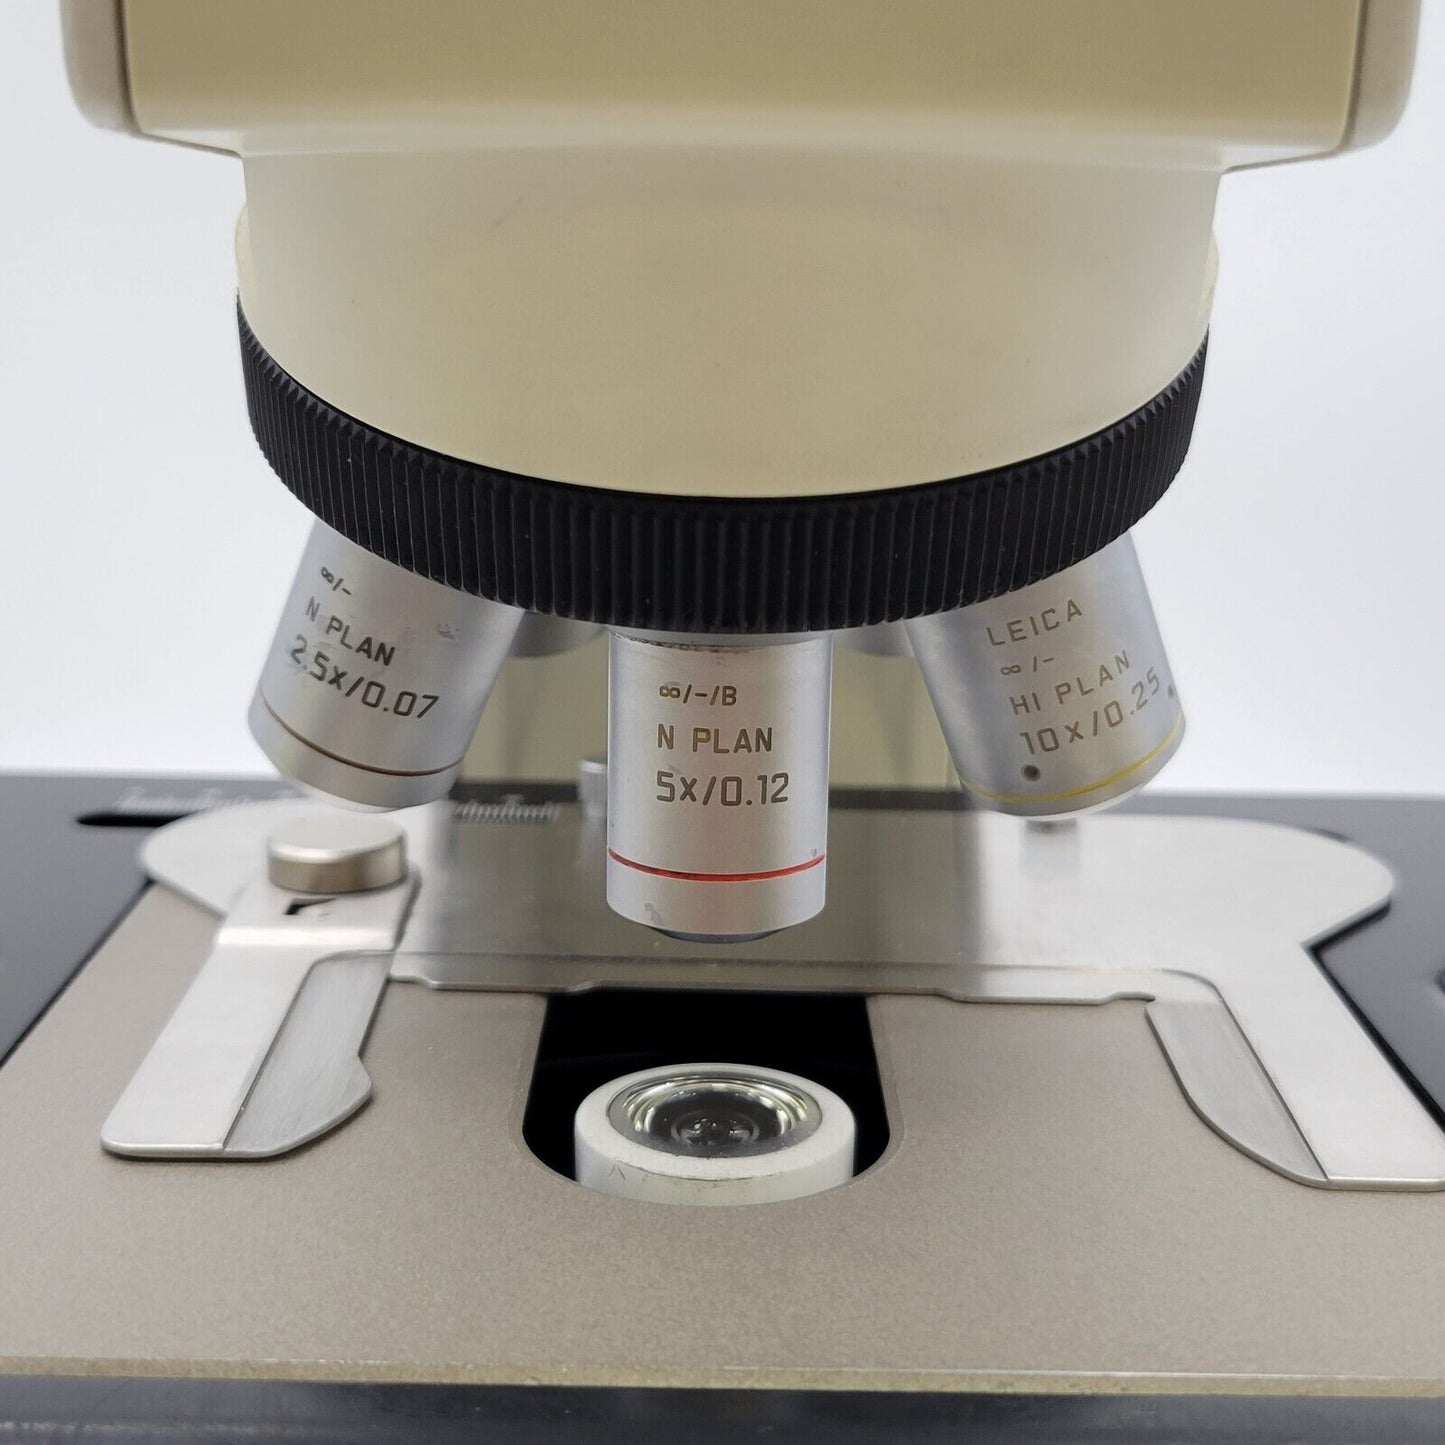 Leica Microscope DM1000 with 2.5x Objective for Pathology / Mohs - microscopemarketplace